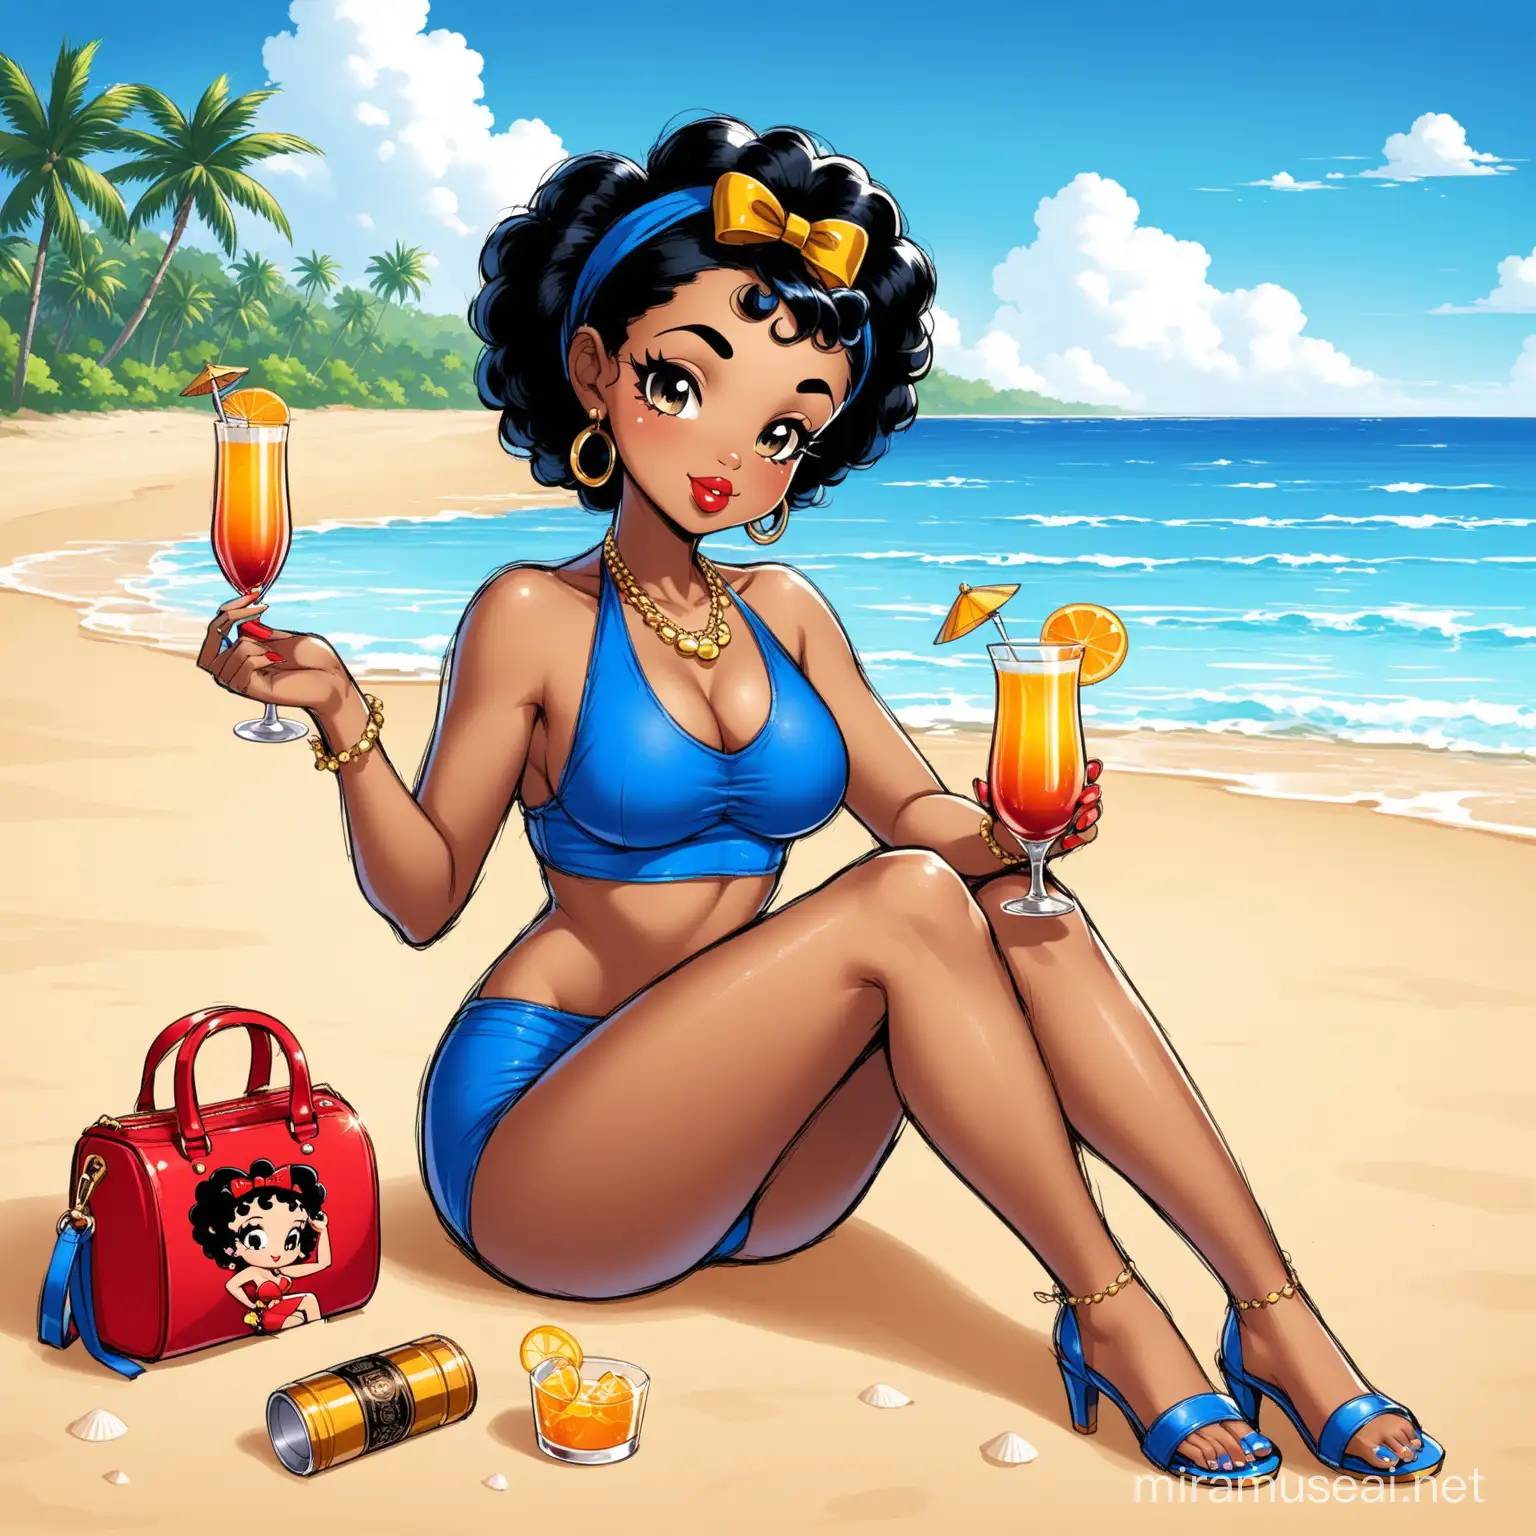 create betty boop african american fashionista with alcoholic drink in hand sitting on a beach in royal blue bathing suit